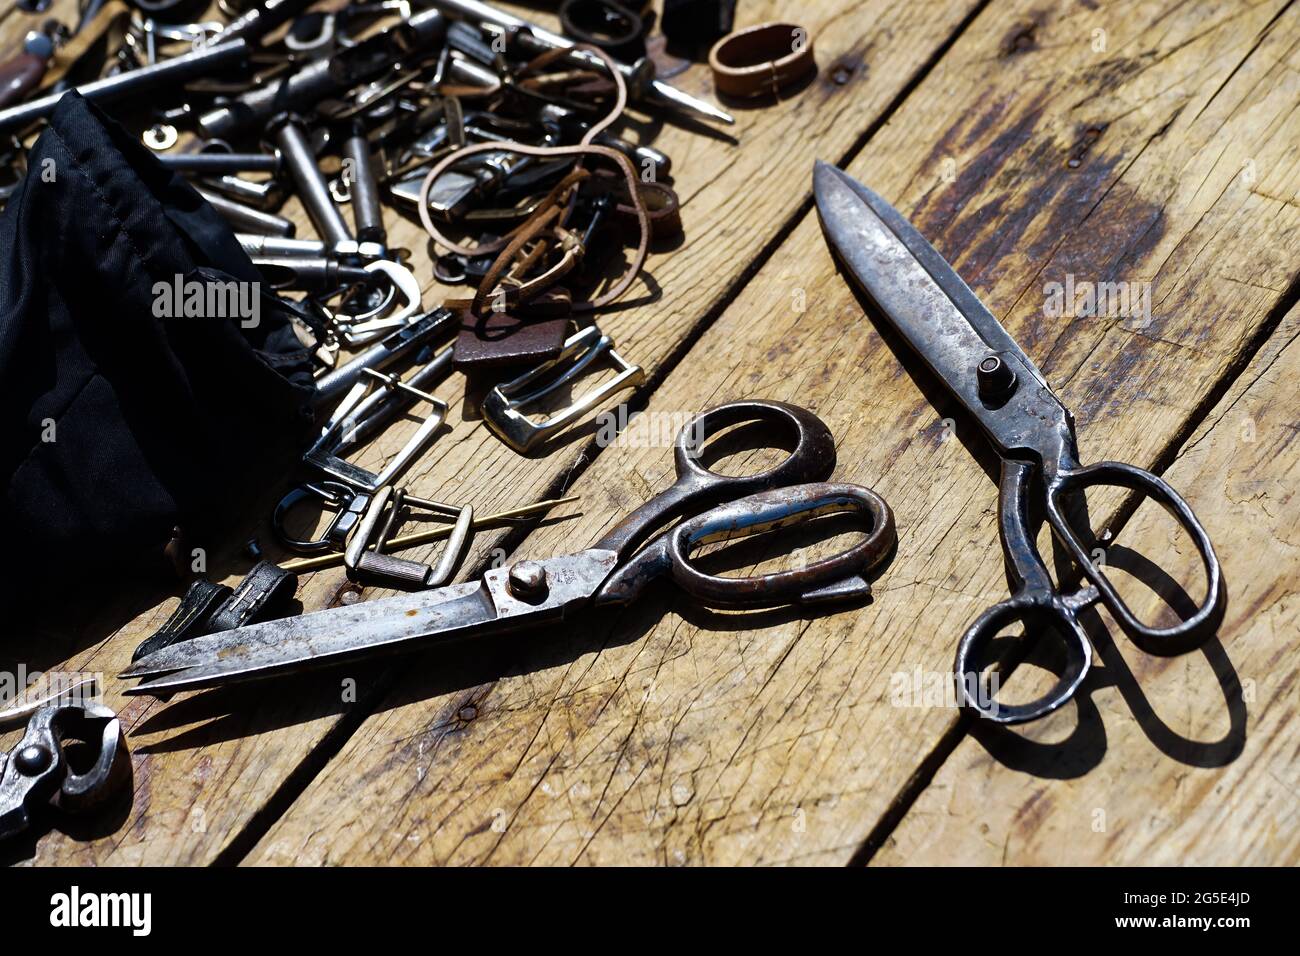 Bucharest, Romania - June 24, 2021: The leather tools of a traditional craftsman, at the Dimitrie Gusti National Village Museum, in Bucharest. Stock Photo